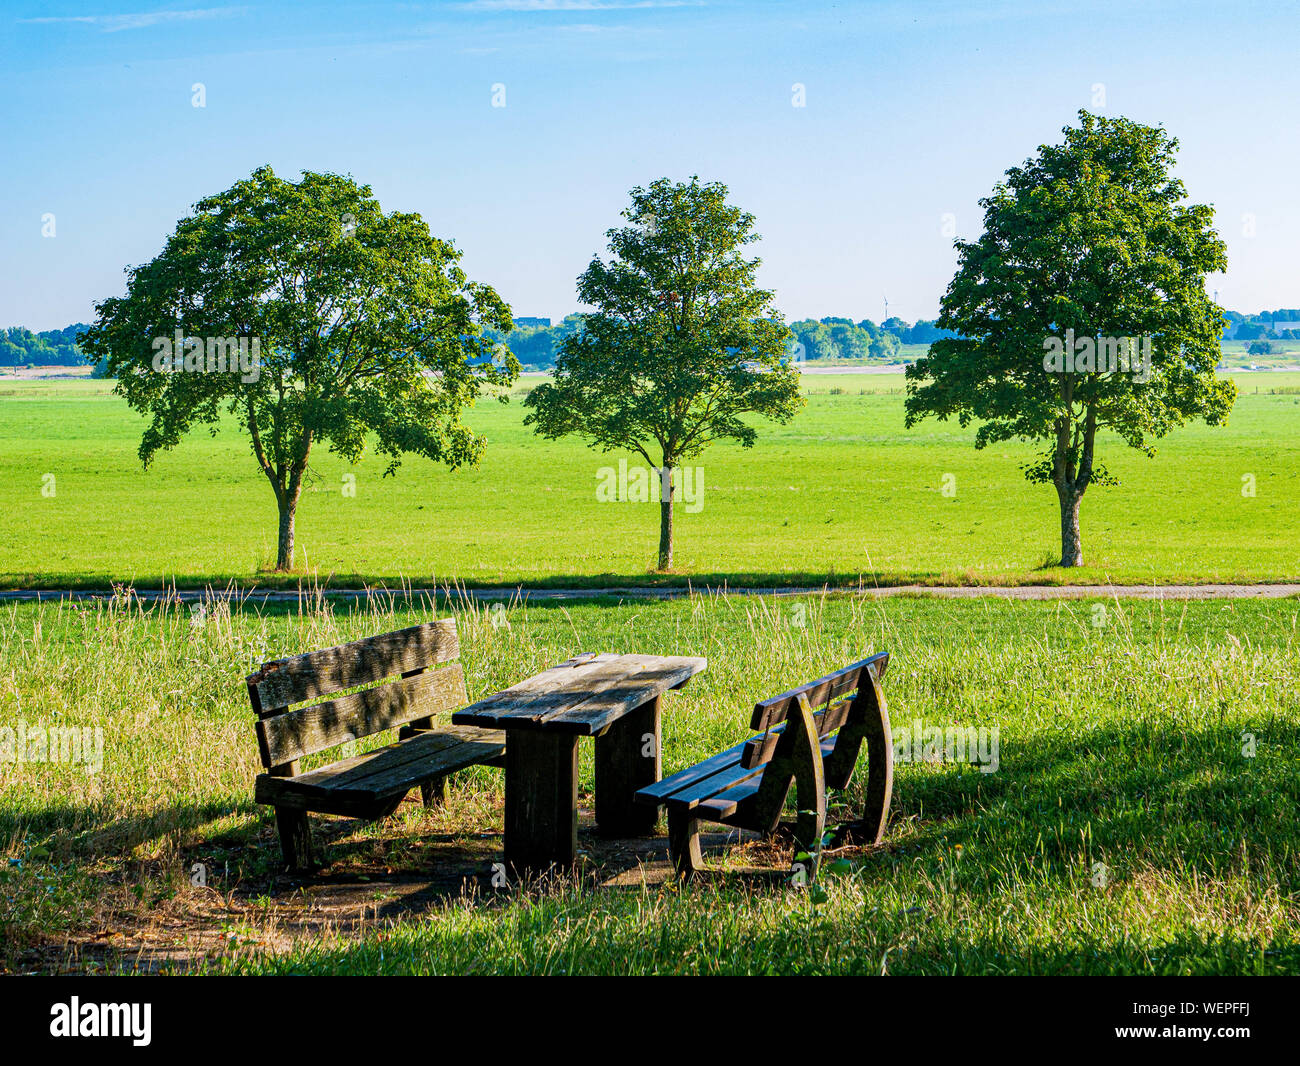 Grass green farmland with bench in the foreground and three trees behind Stock Photo